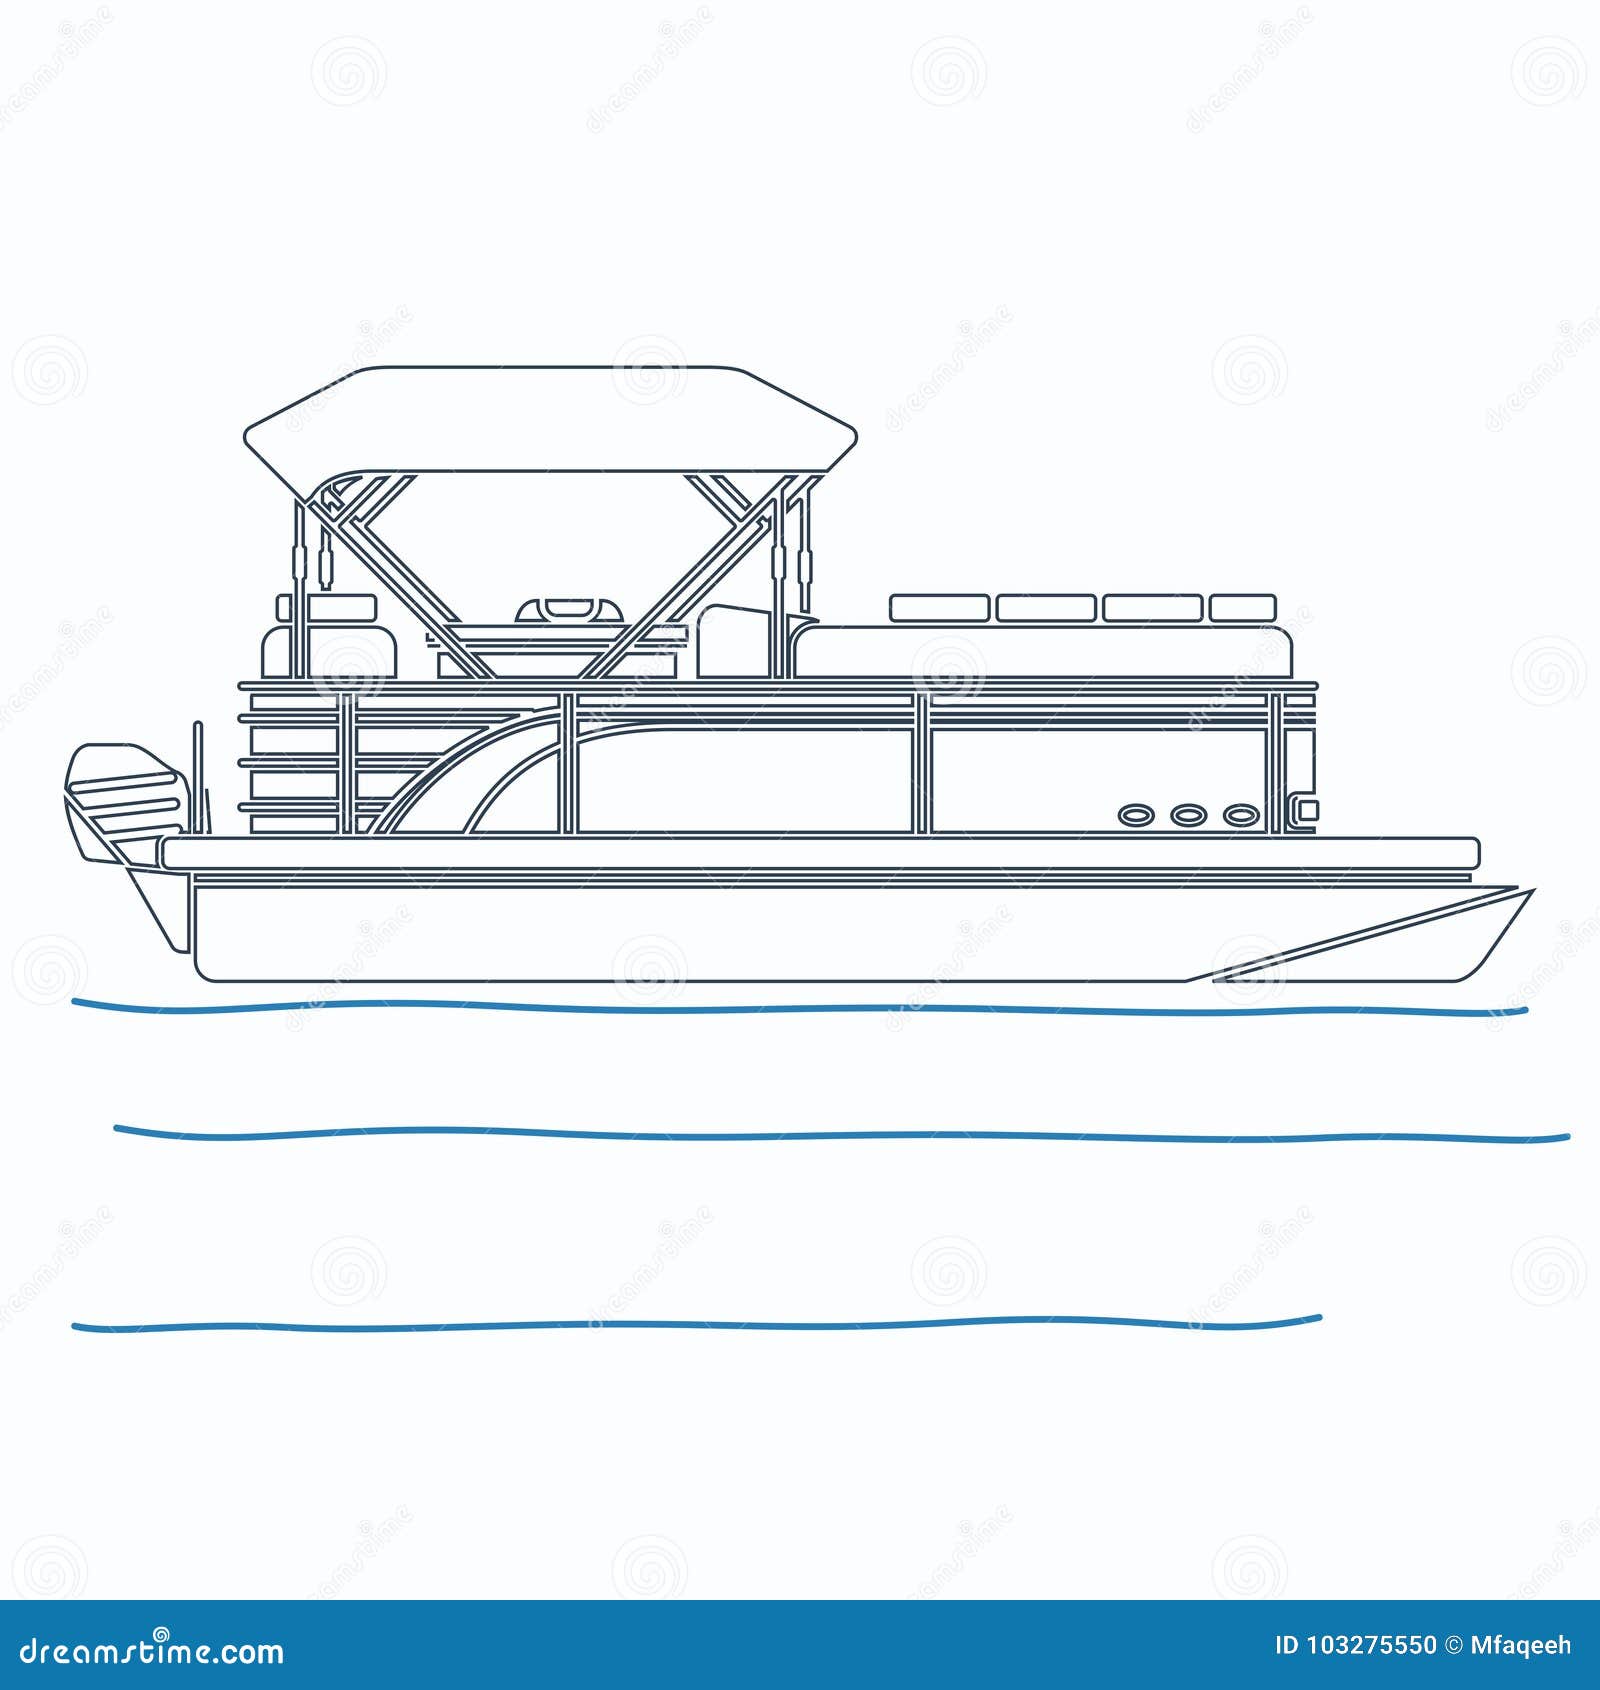 outline style side view pontoon boat  